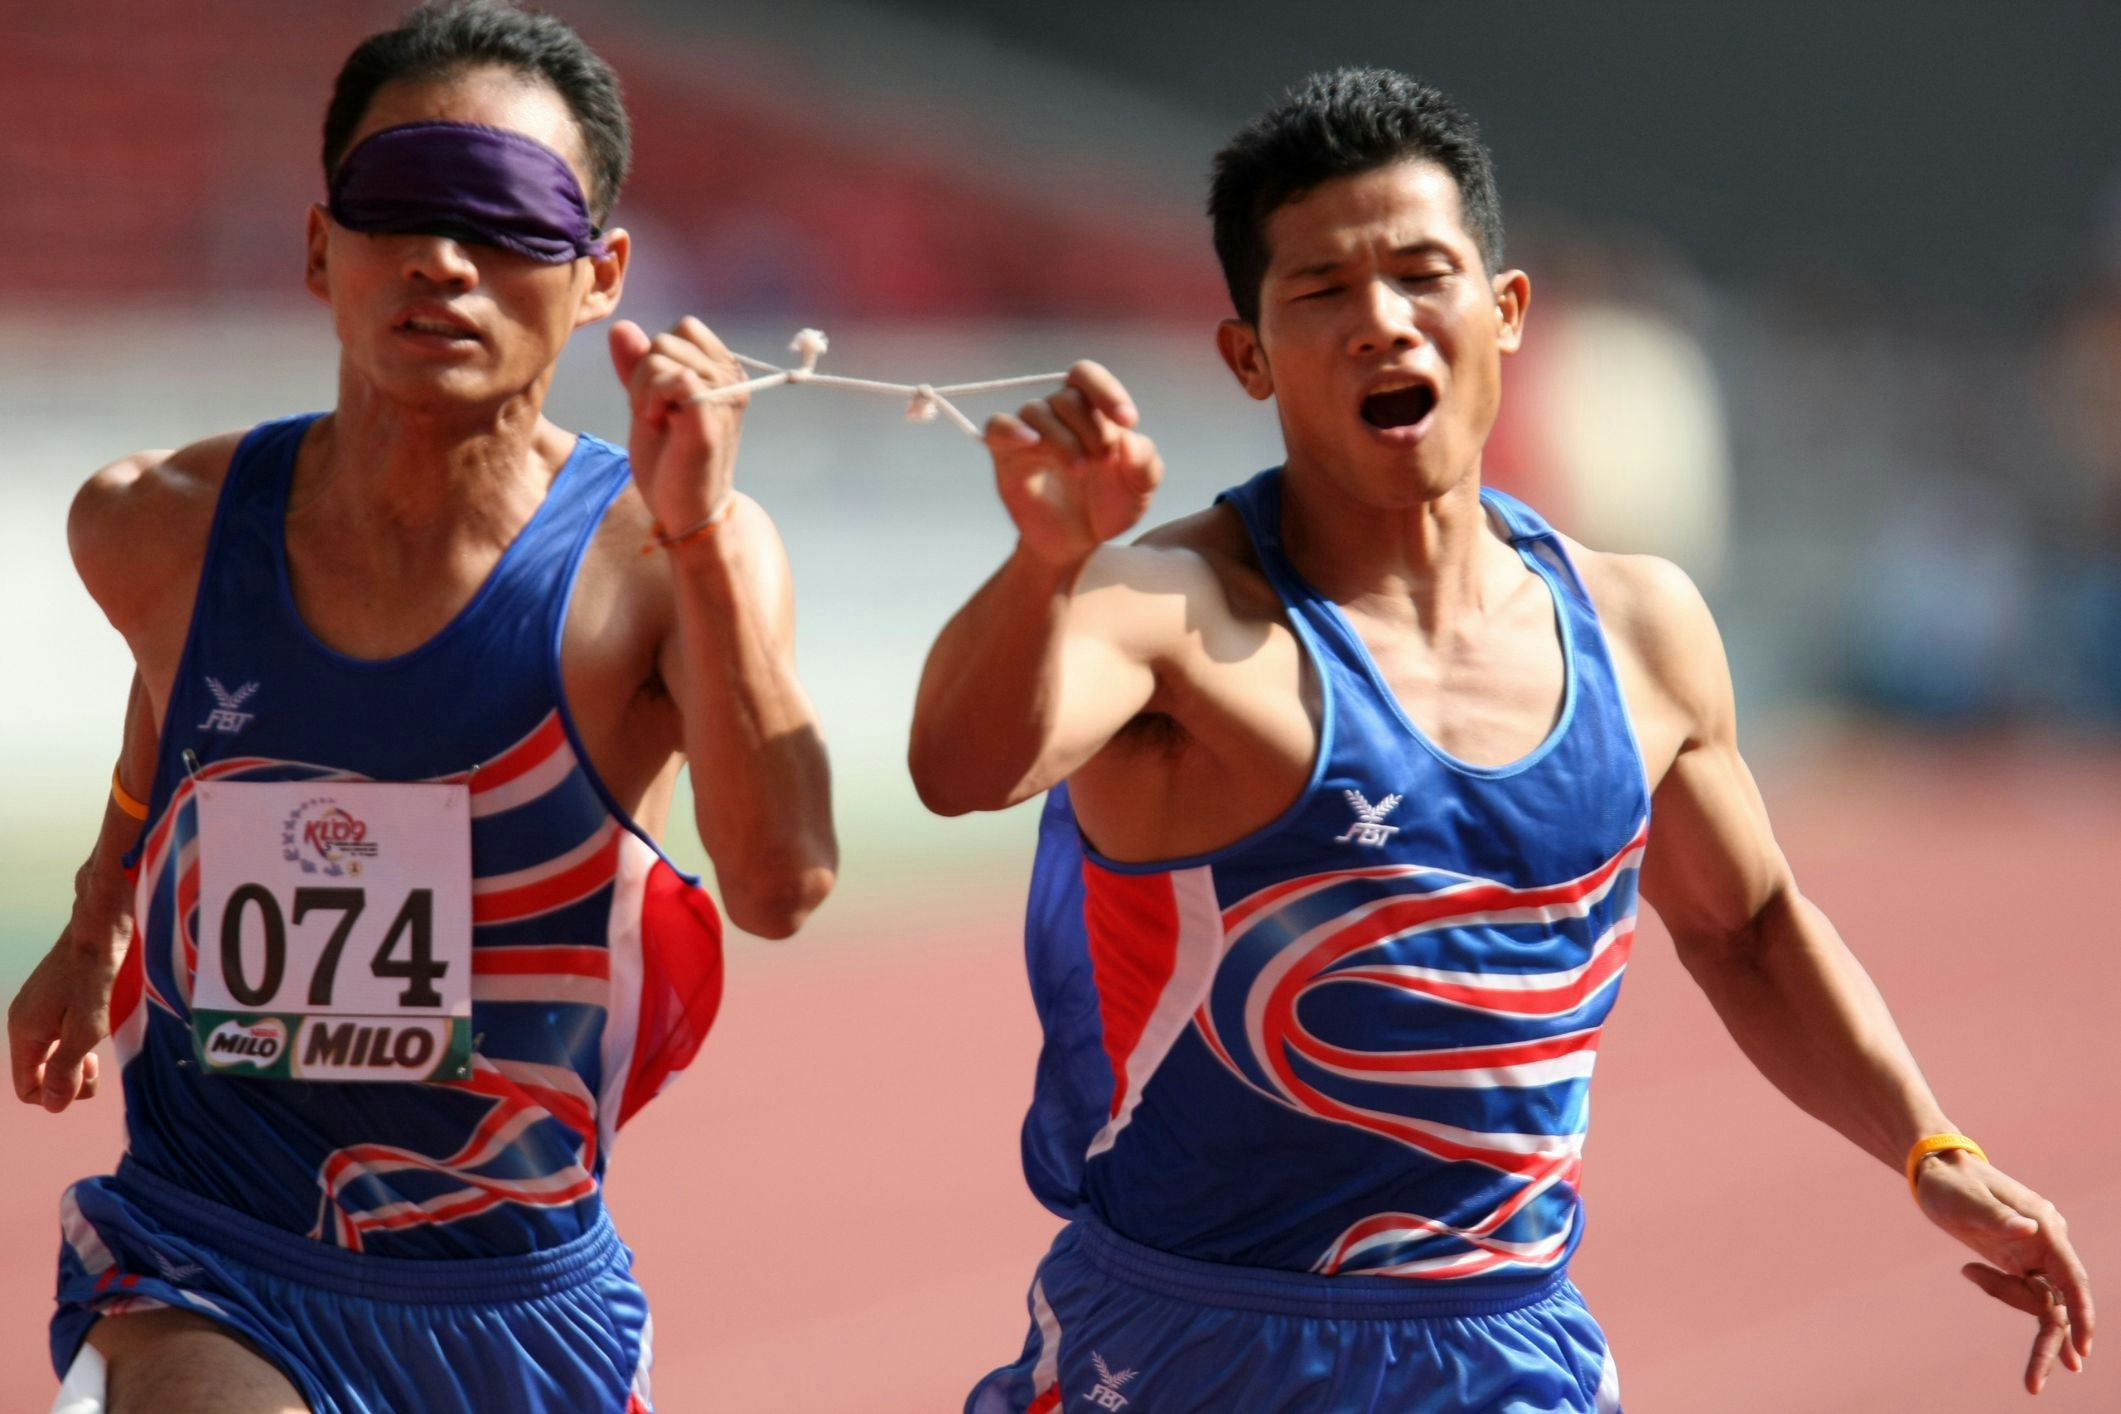 Paralympians living with vision impairment have to keep pace with their guides in an impressive show of camaraderie and determination. [Image courtesy of Chen HW via Shutterstock]
